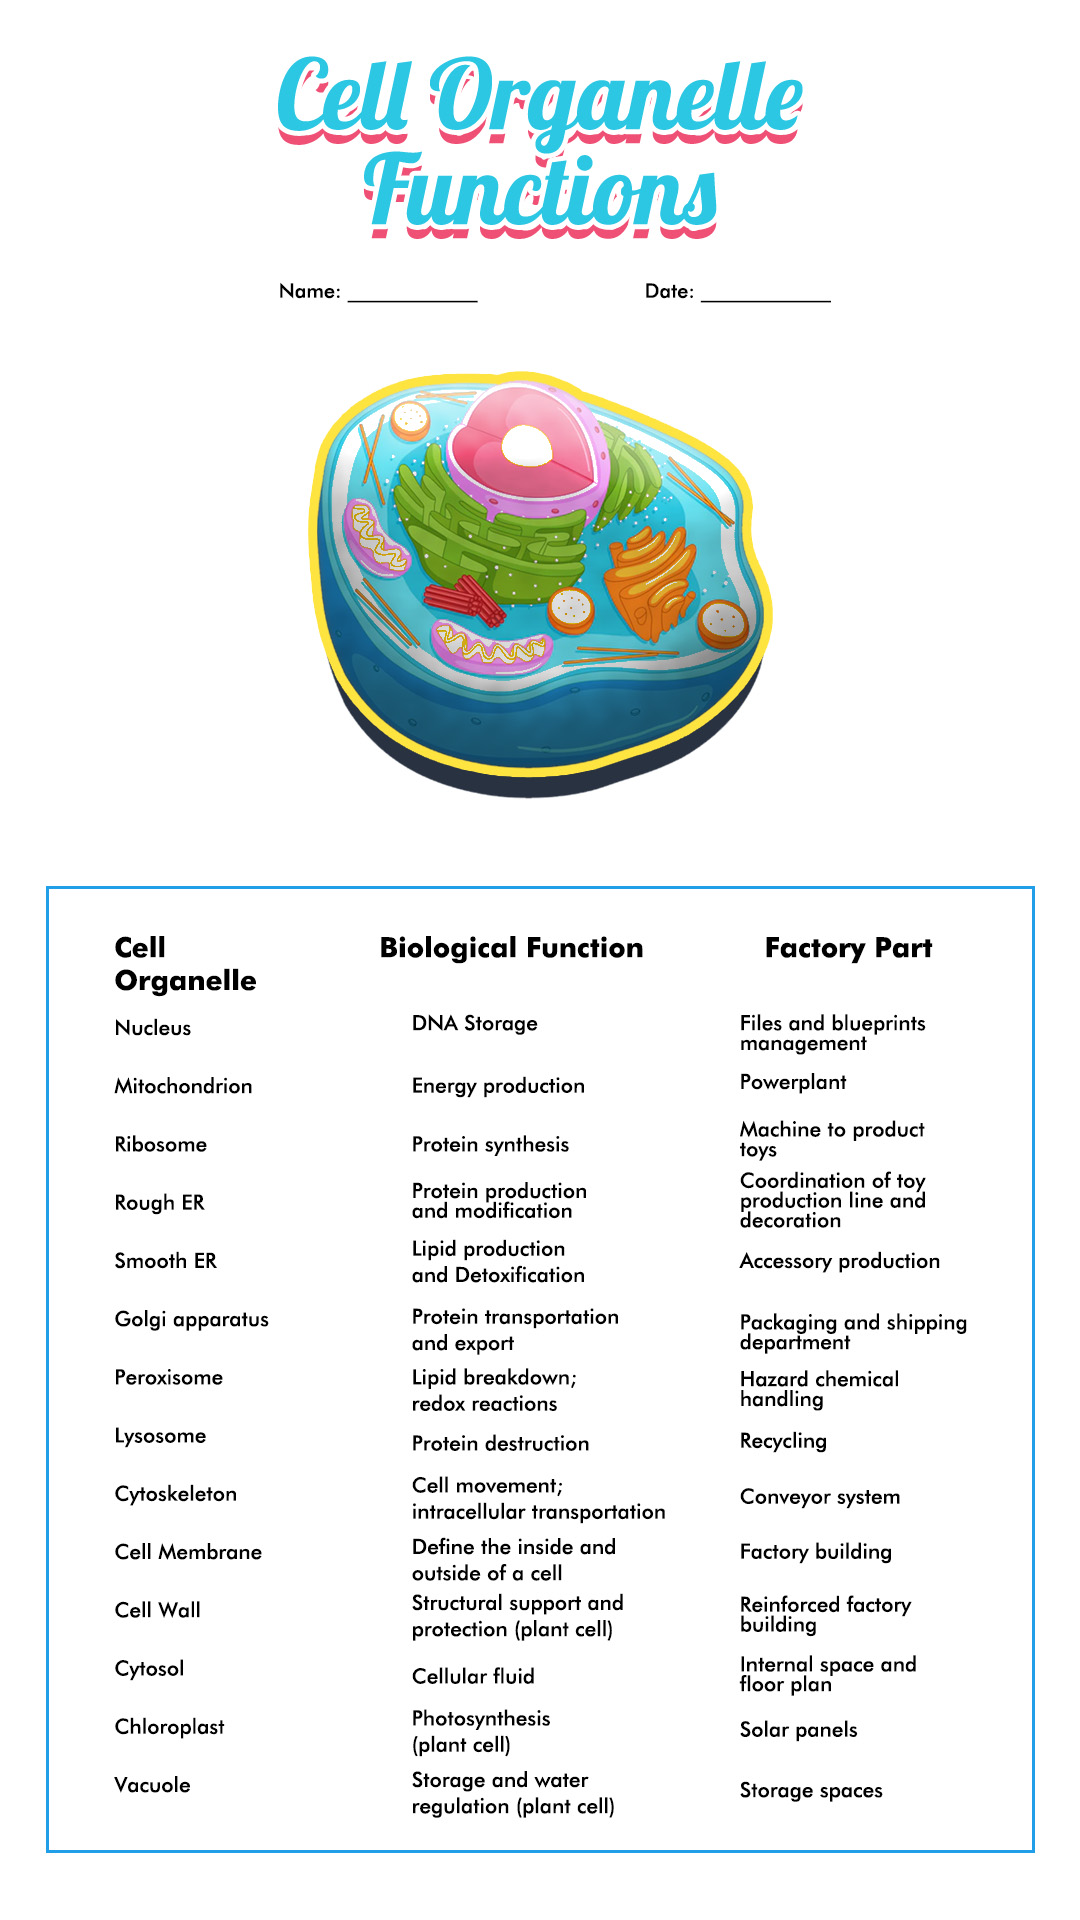 Animal Cell Organelles Functions